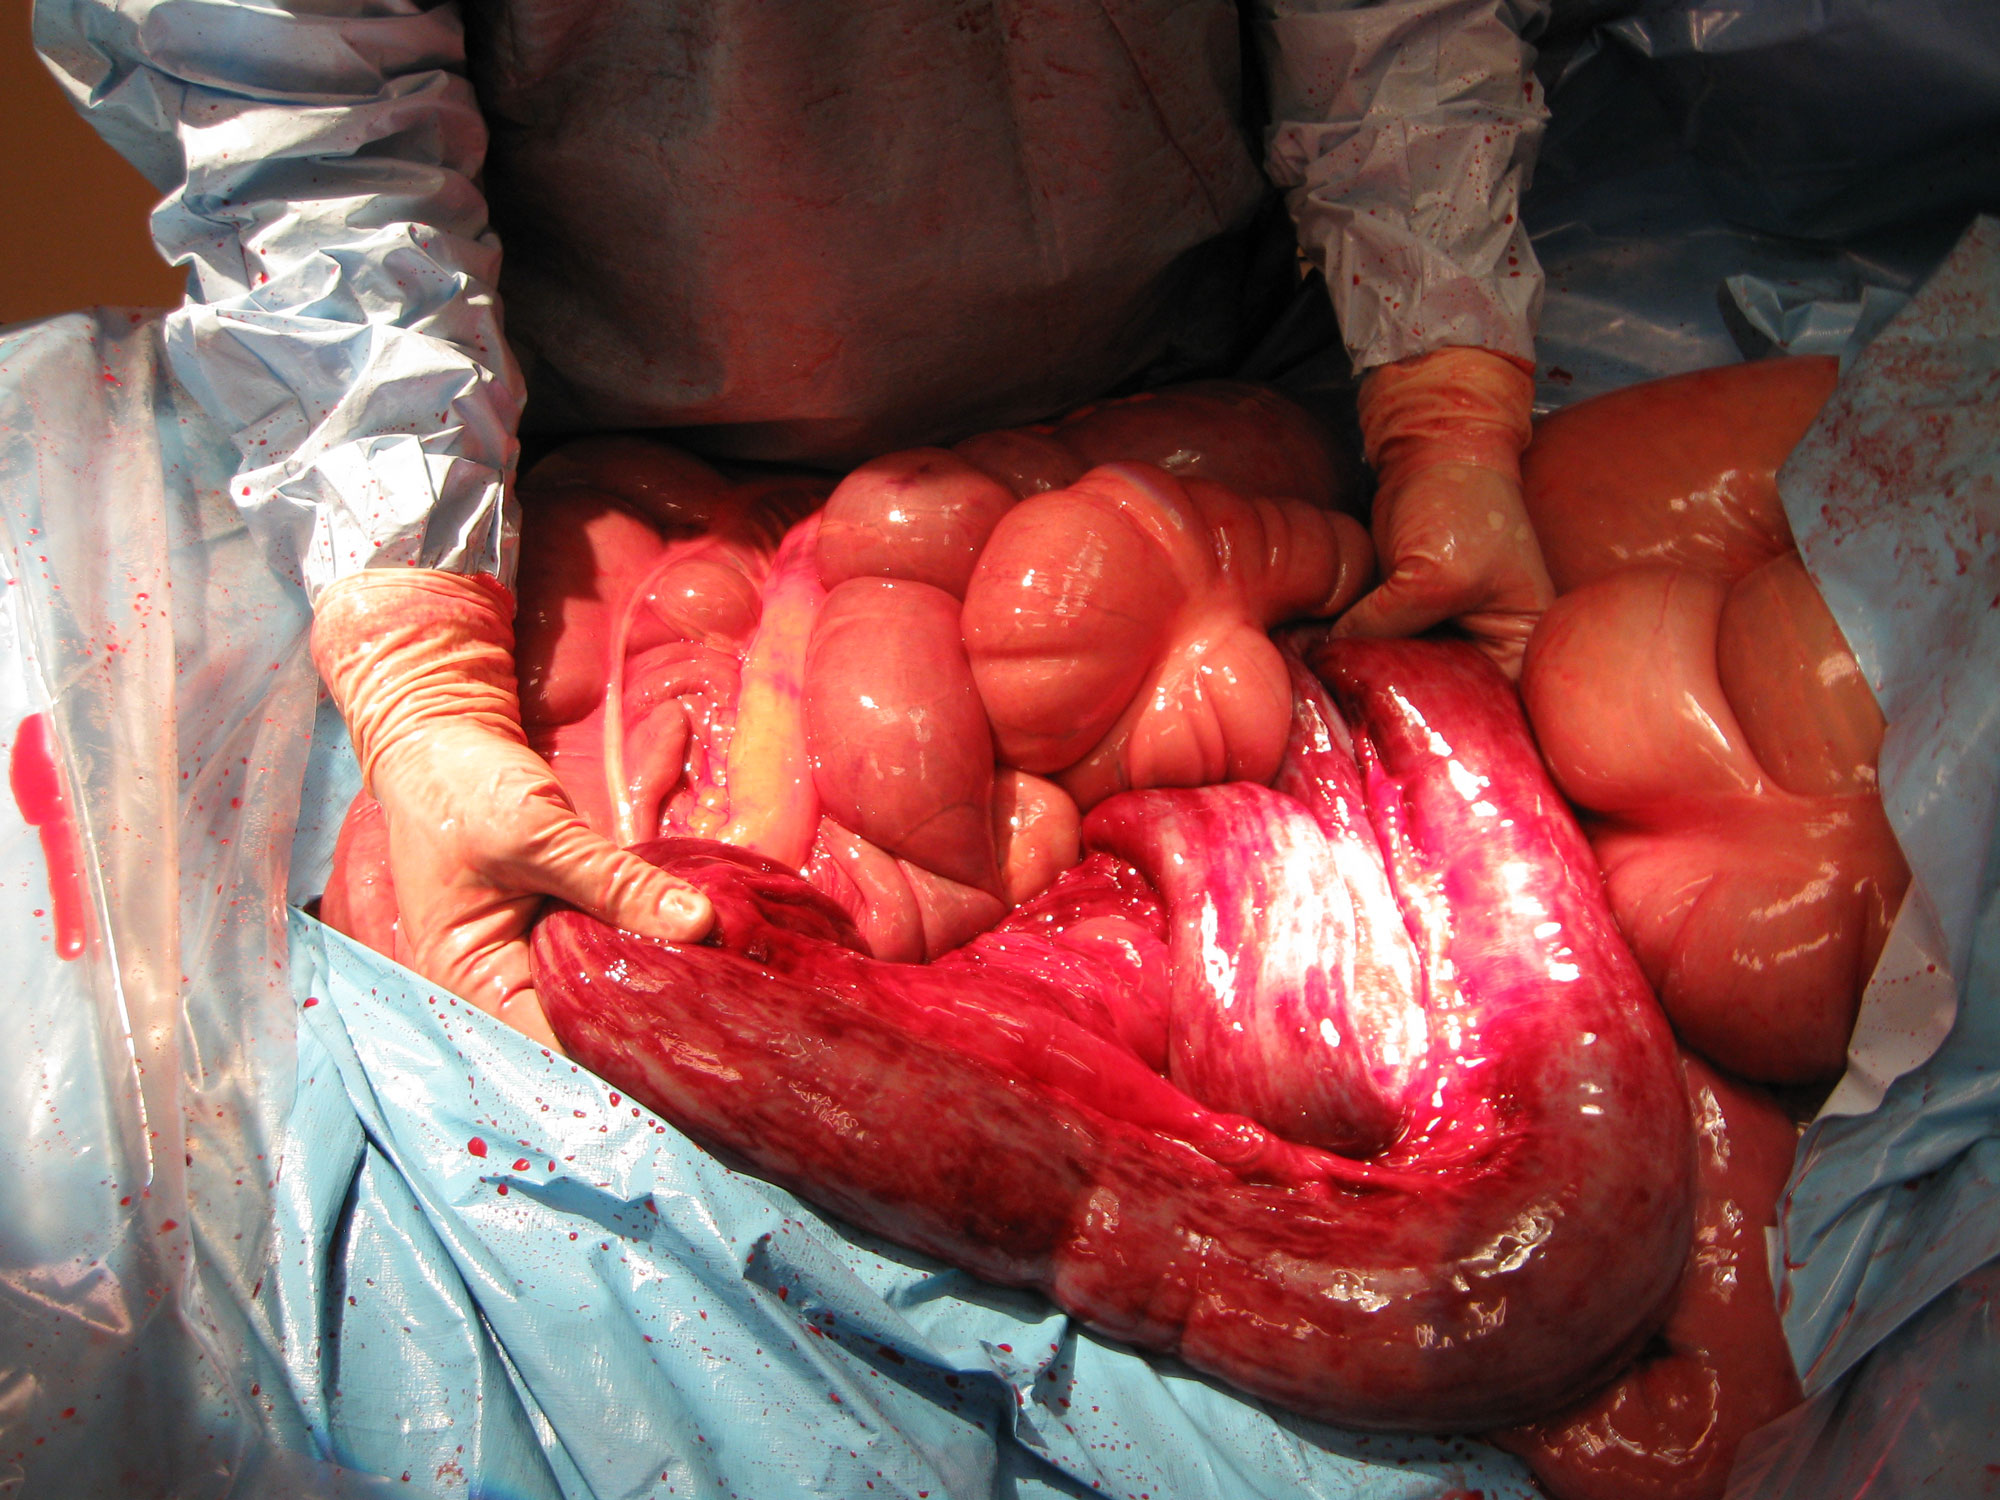 The intestine of a horse suffering from equine colic.